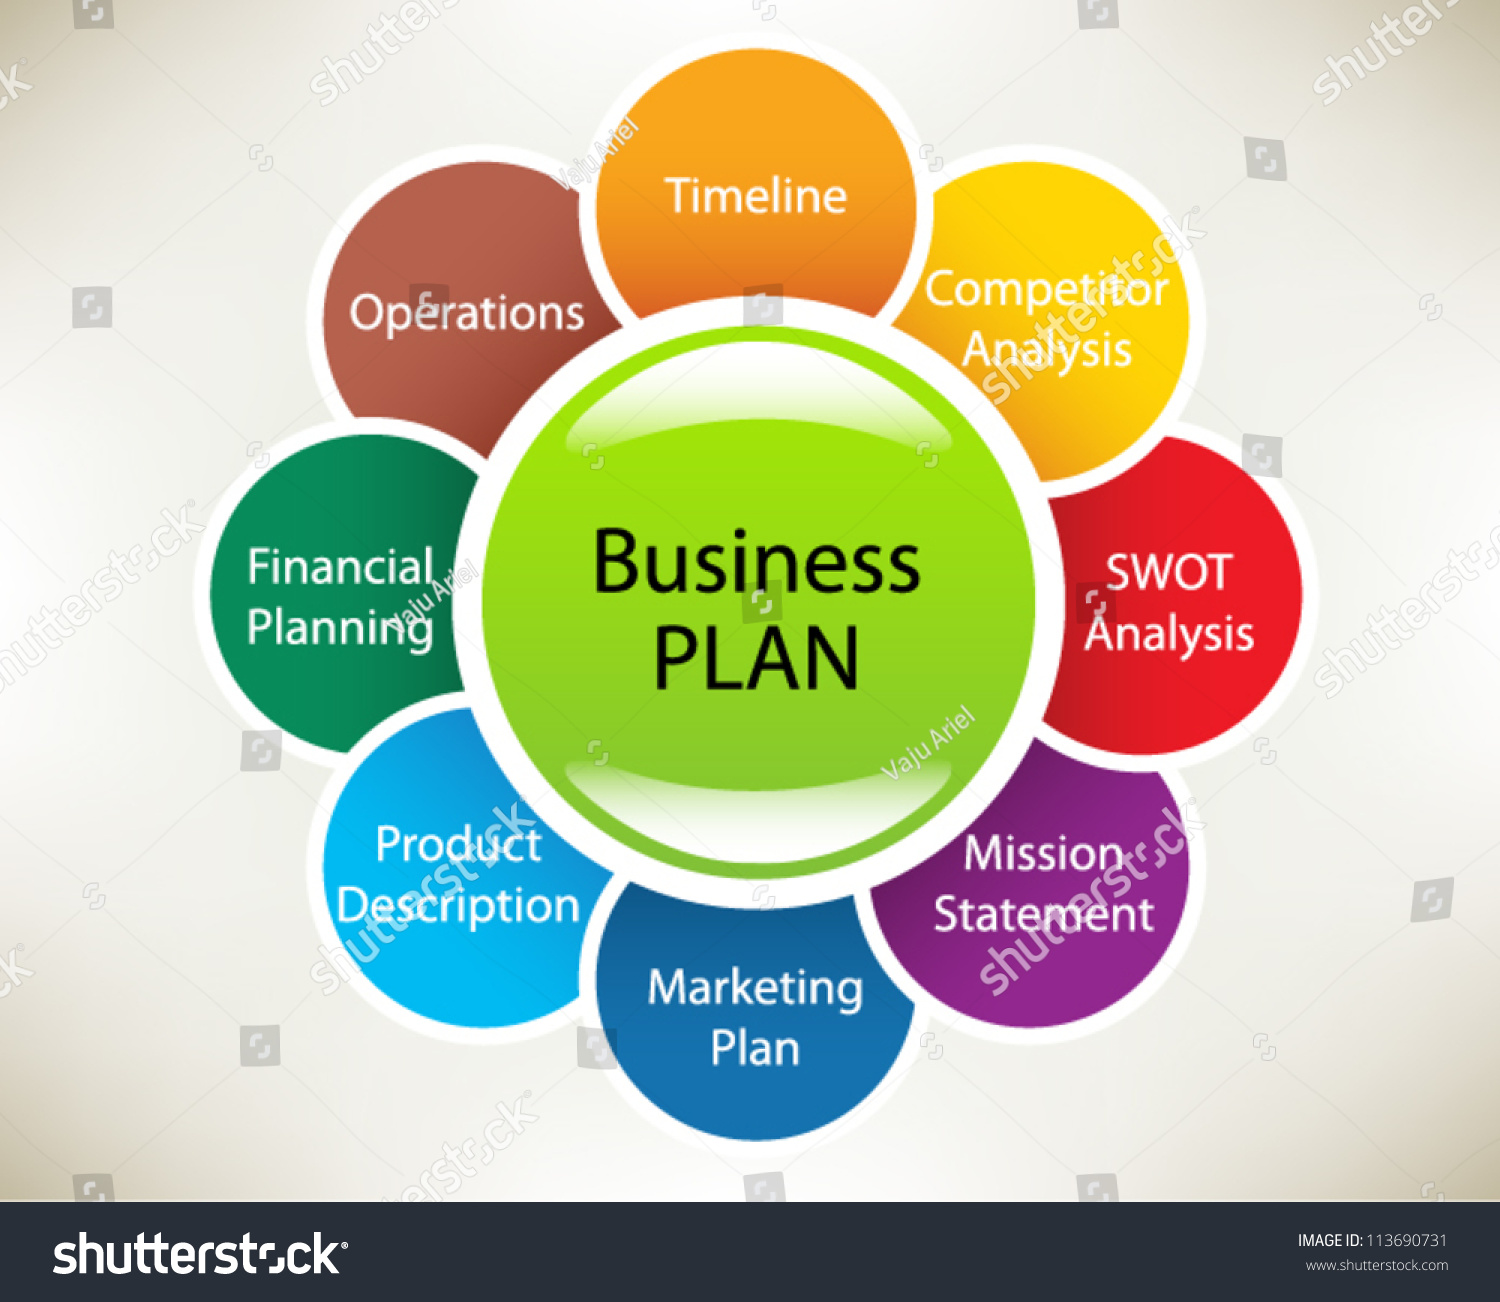 Business Plan Section 4: Products and Services